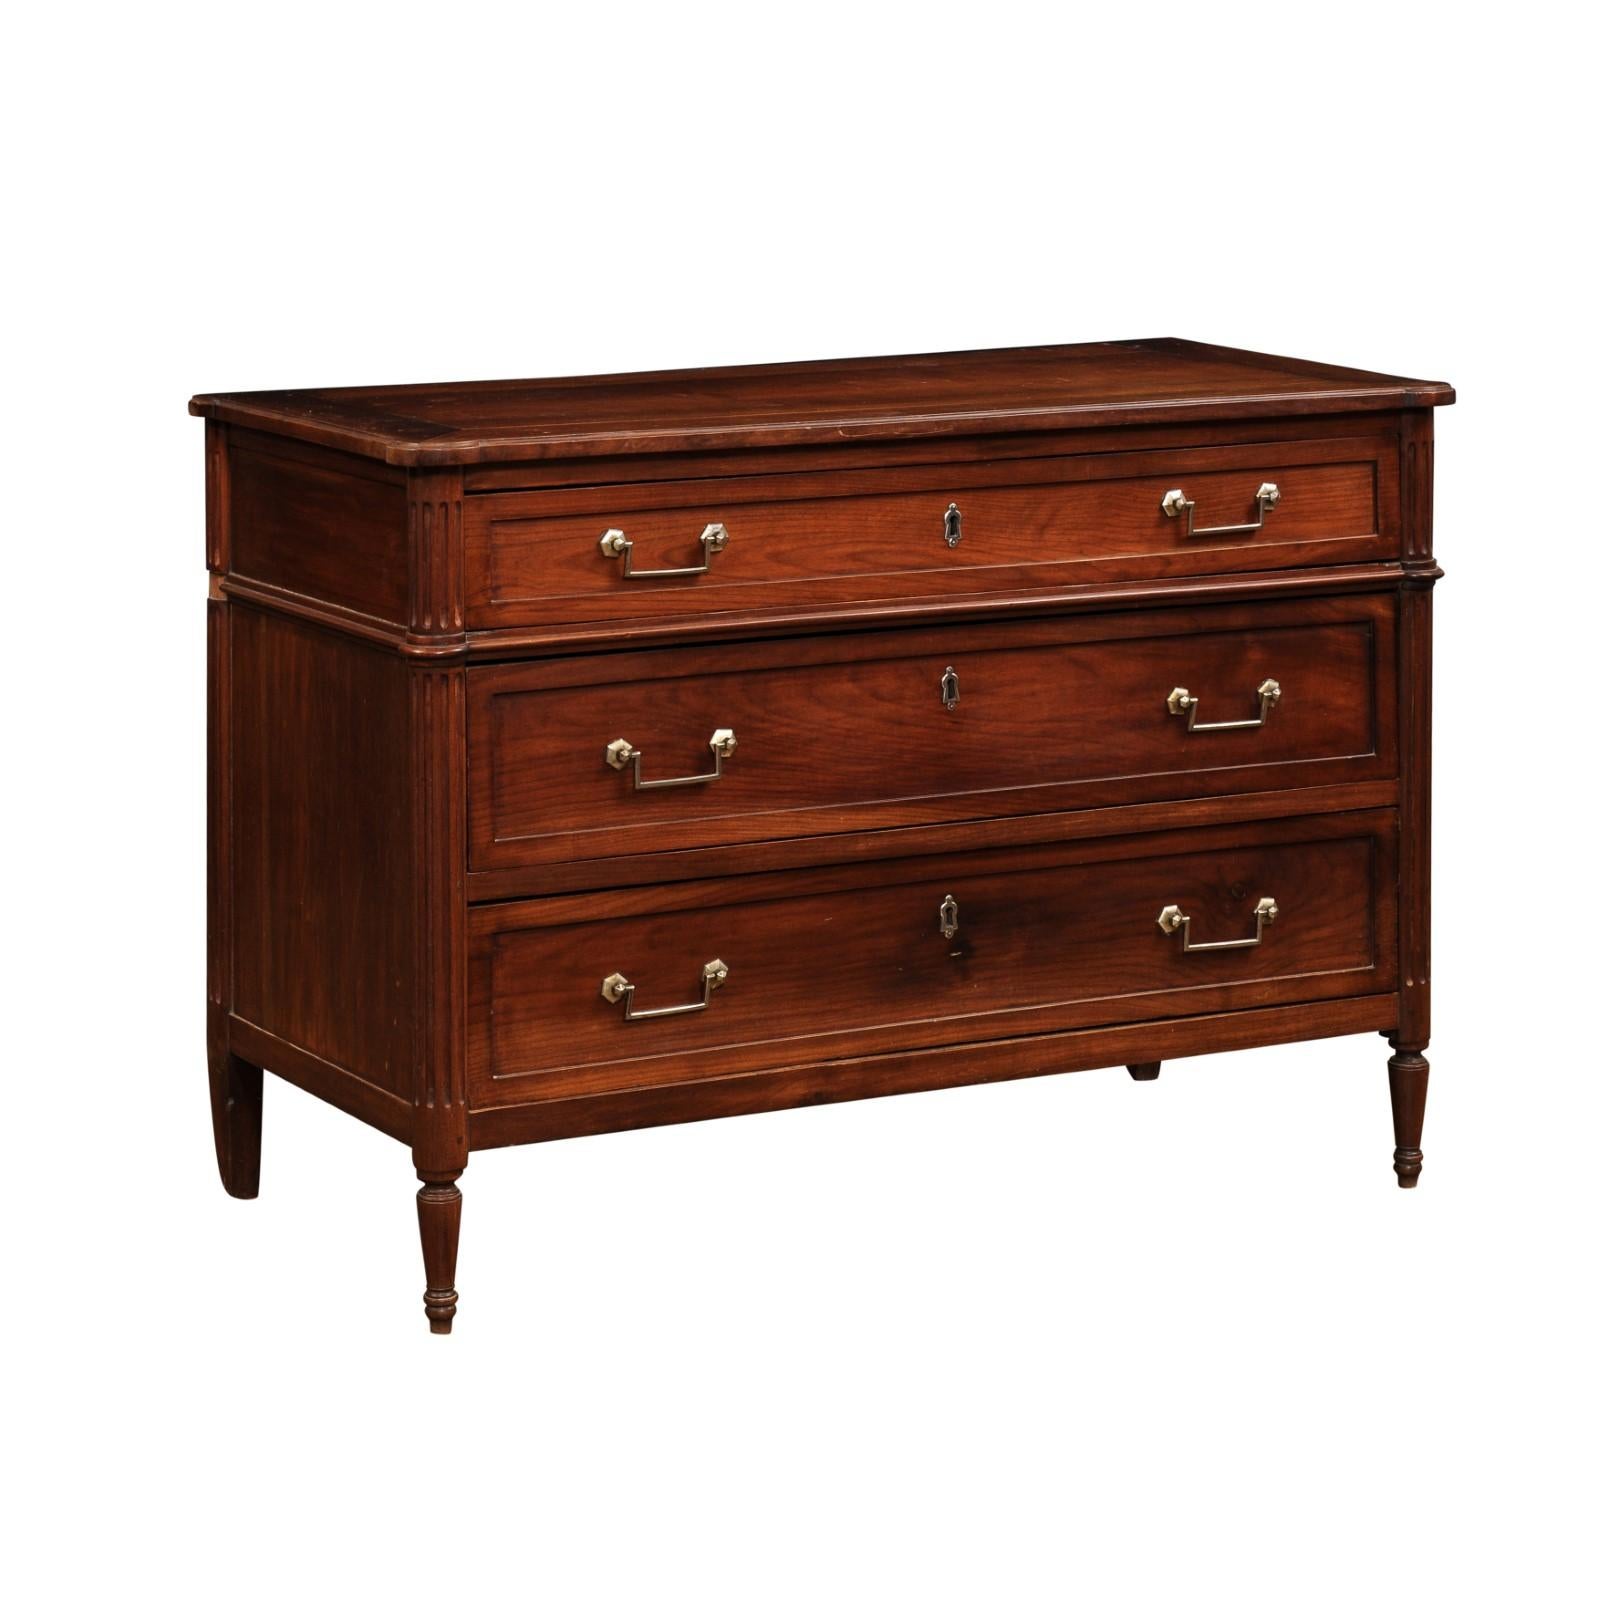 A French Louis XVI style cherry commode from the 19th century, with three graduated drawers, linear brass hardware, fluted side posts and cylindrical tapered legs. Created in France during the 19th century, this cherry commode showcases the